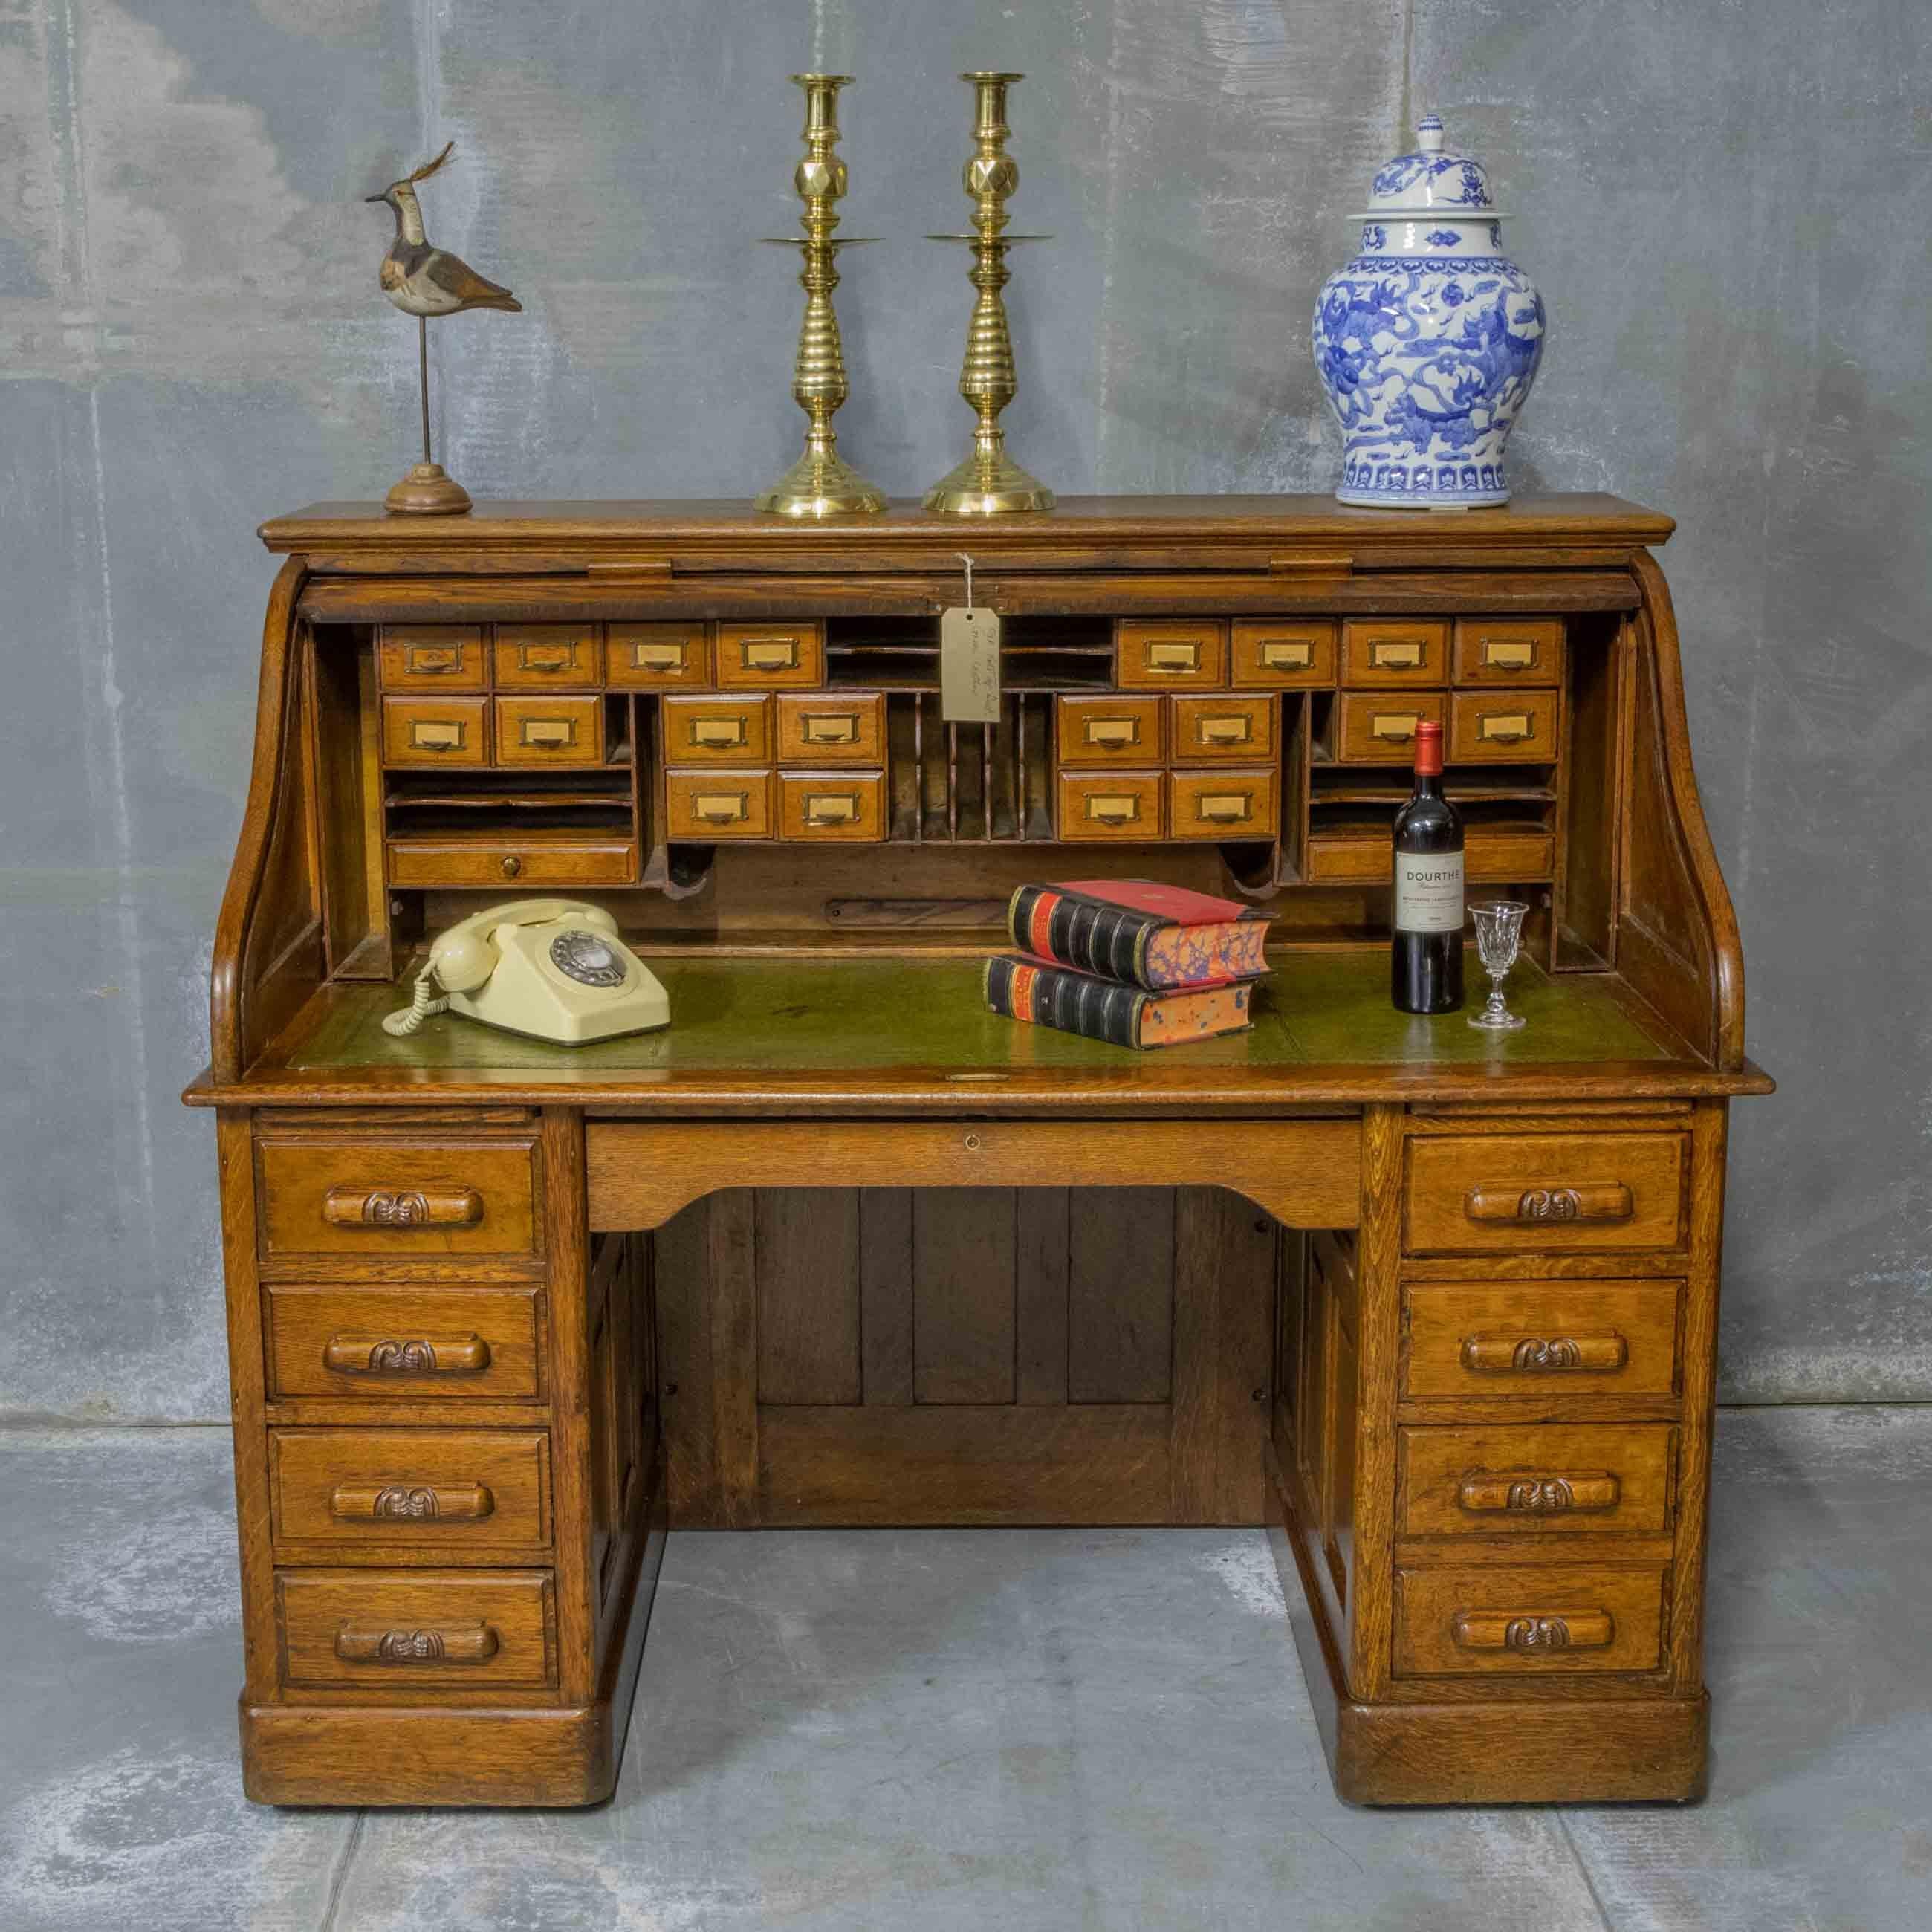 A beautiful Edwardian oak roll top desk of large proportions and with a large width kneehole. The interior is very well fitted with numerous drawers, slides and pigeon holes. The writing surface is of an antique finish olive green leather with gilt